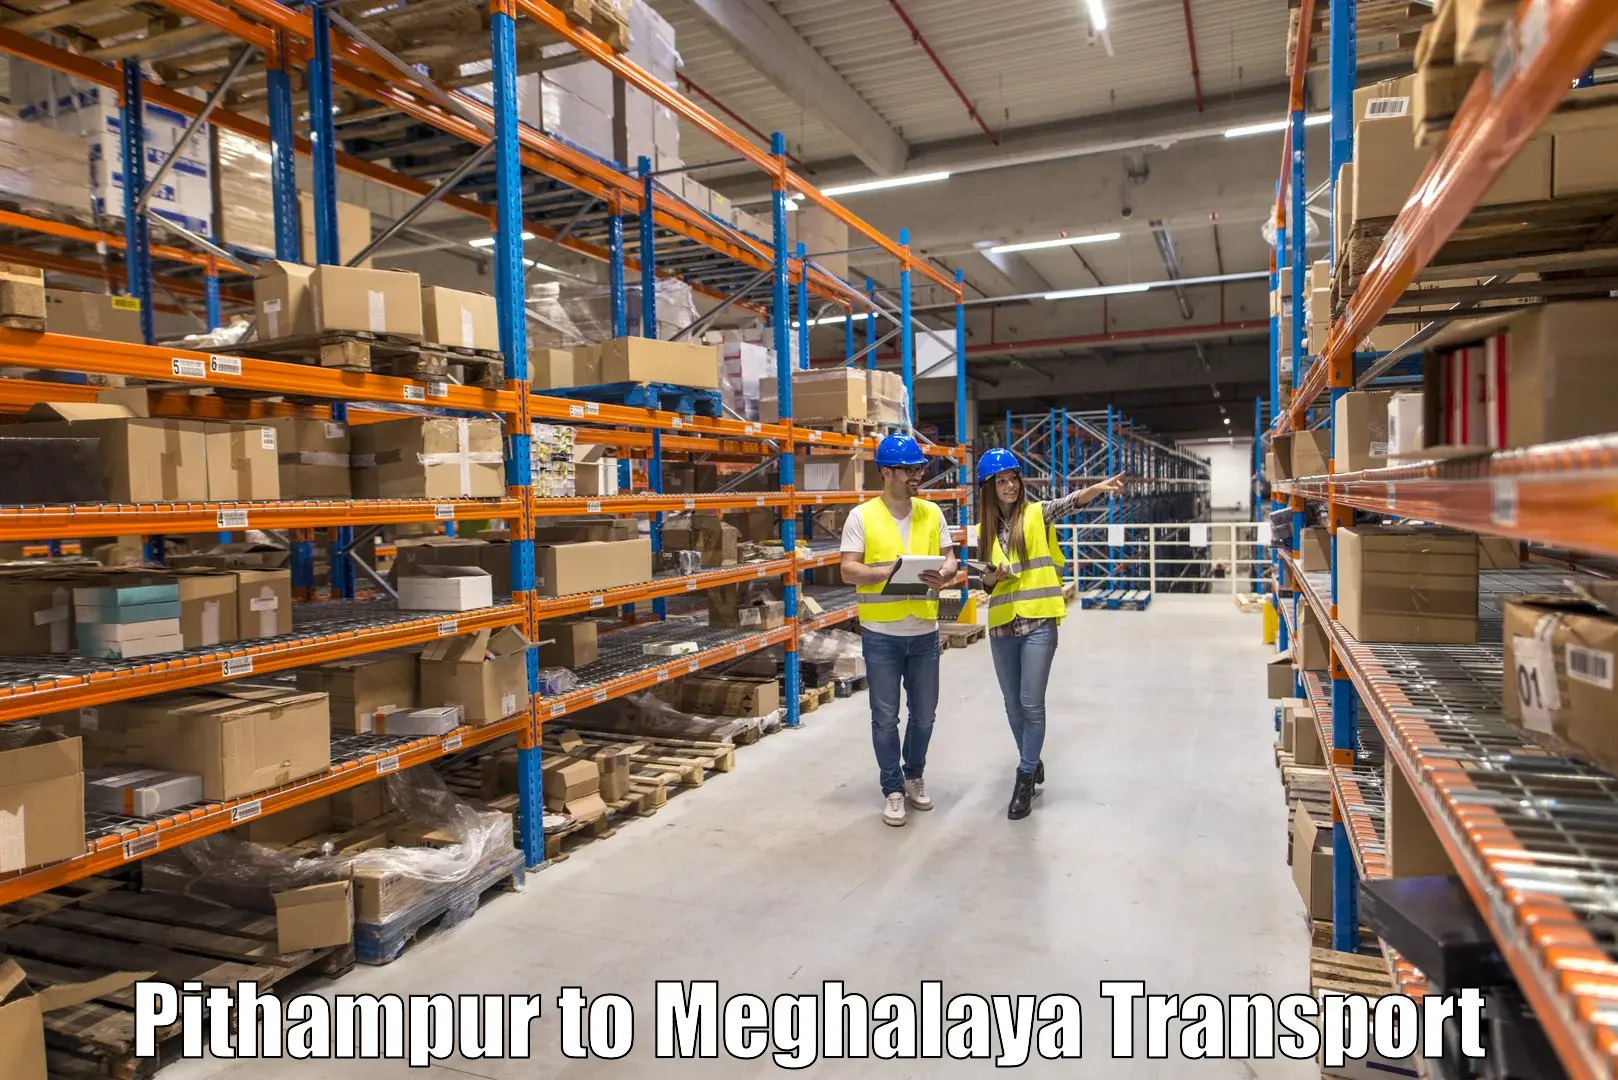 Vehicle transport services in Pithampur to Meghalaya